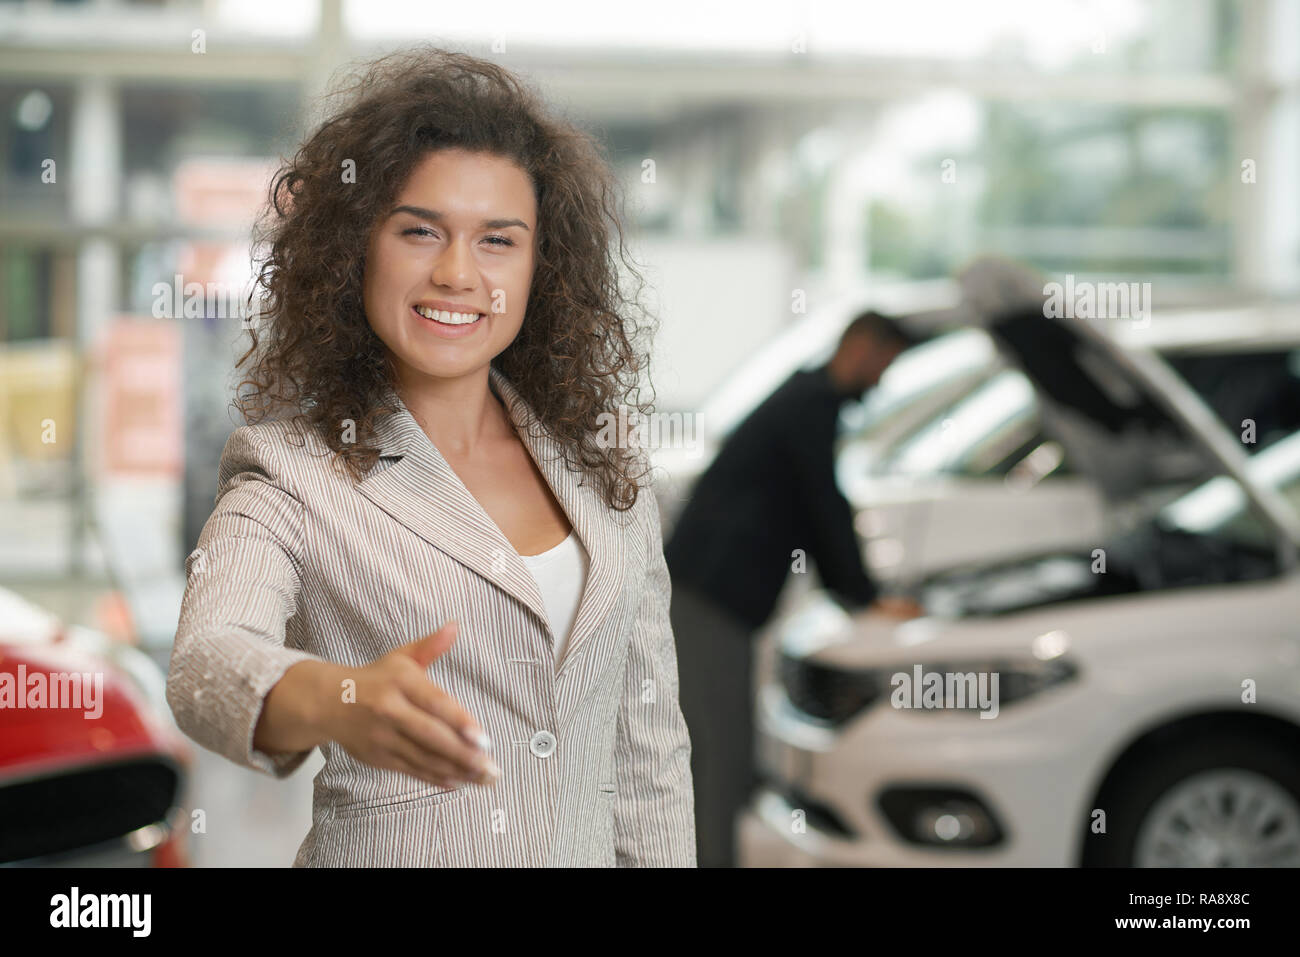 Female car dealer smiling and holding hand for shaking. Happy manager making deal in car showroom. Beautiful with curly hair looking at camera, posing. Client of car center observing vehicle behind. Stock Photo